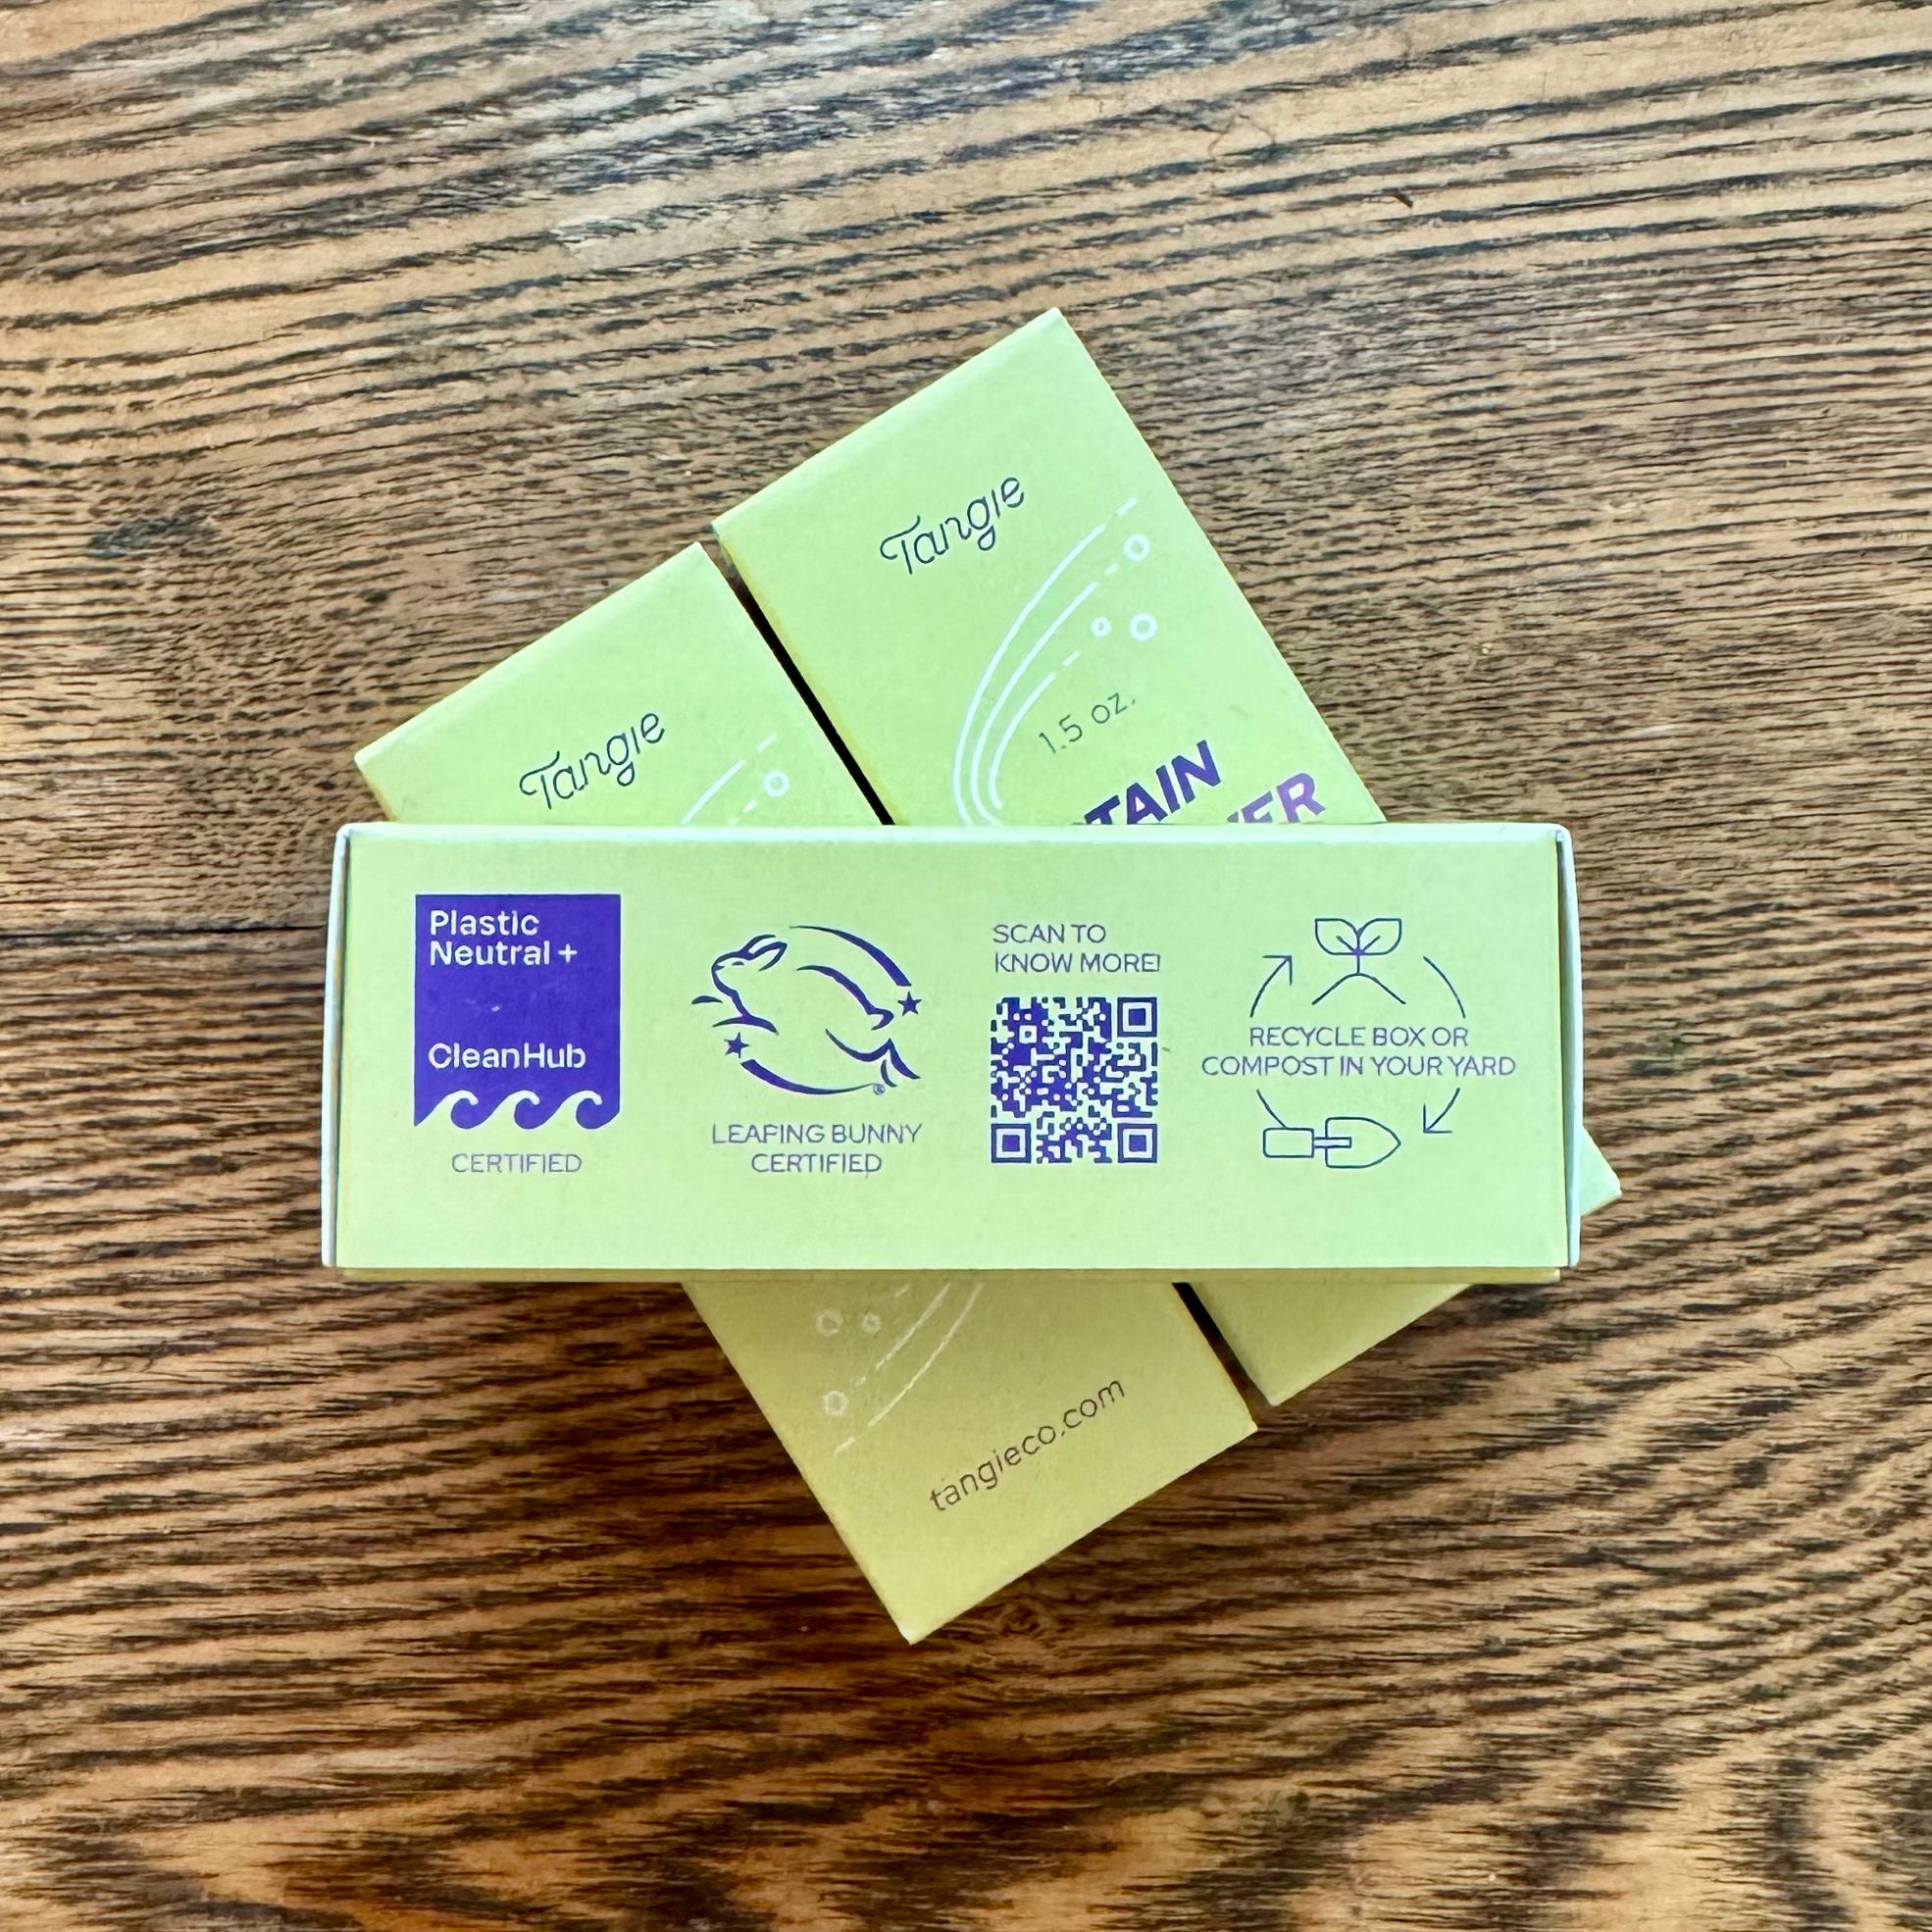 The side panel of a rectangular yellowish box that lists Clean Hub Certified, Leaping Bunny Certified, a QR code linking to more information, and a suggestion to recycle or compost the box when empty.